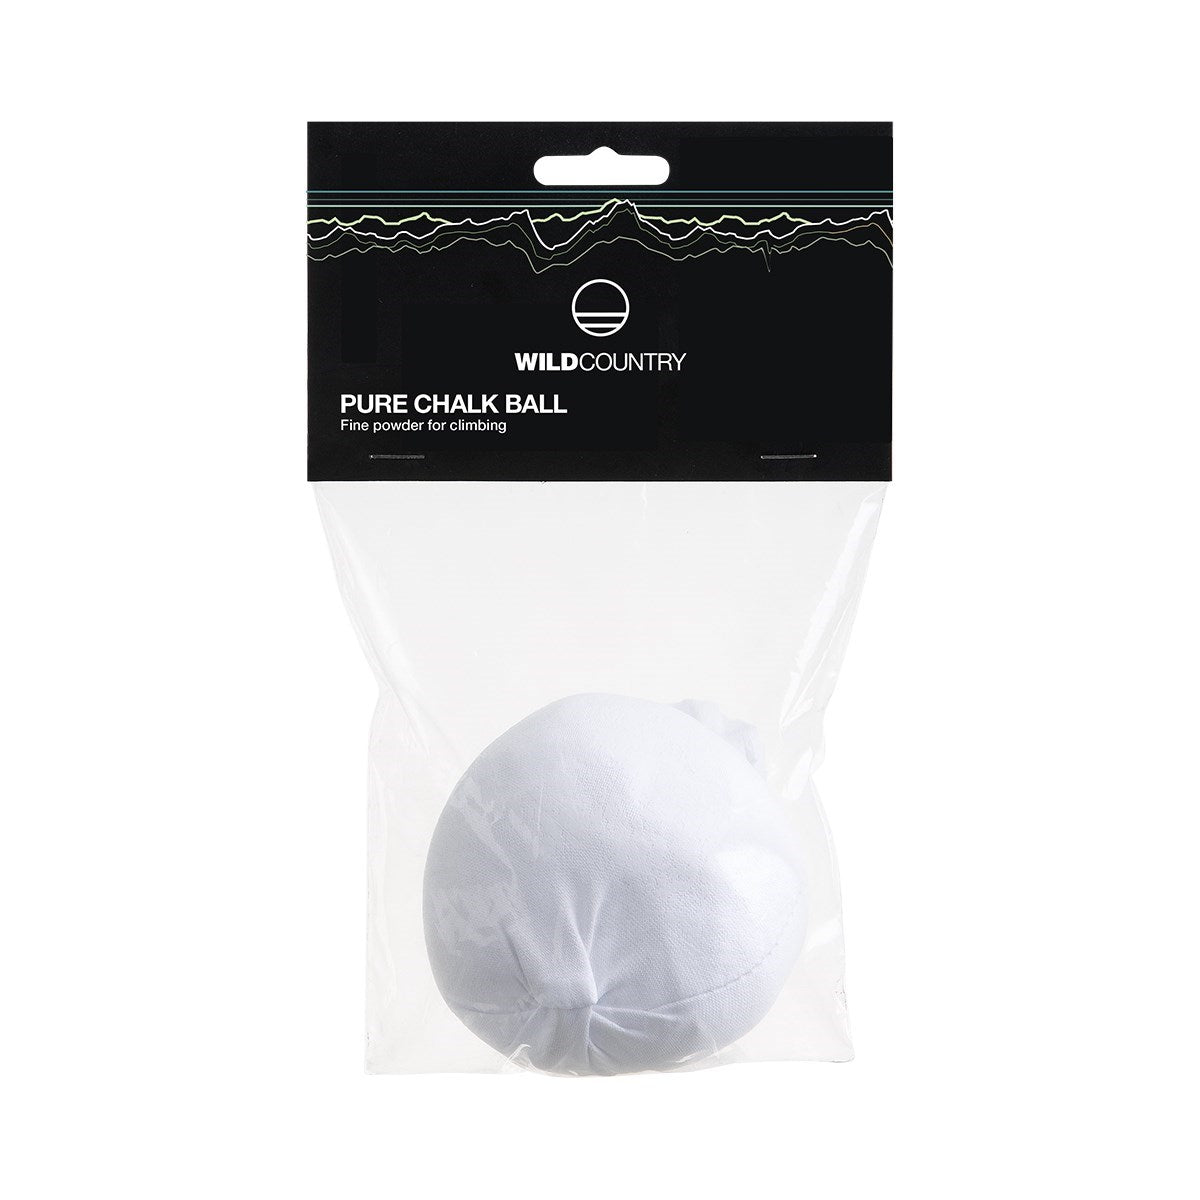 Wild Country Pure Chalk Ball (60g)